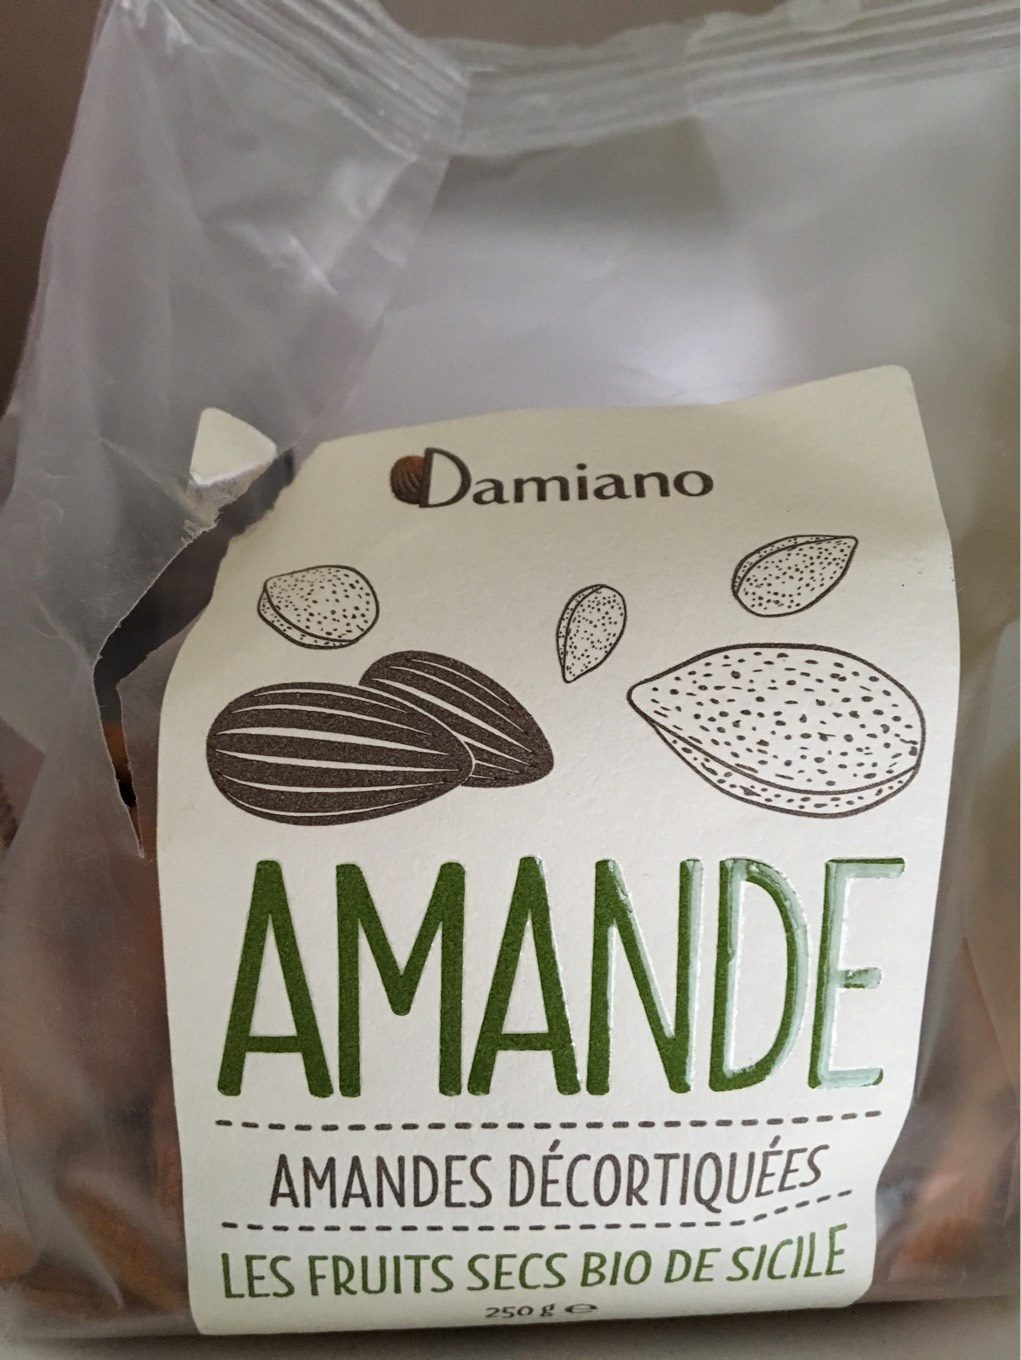 Amandes Decortiquees - Product - fr